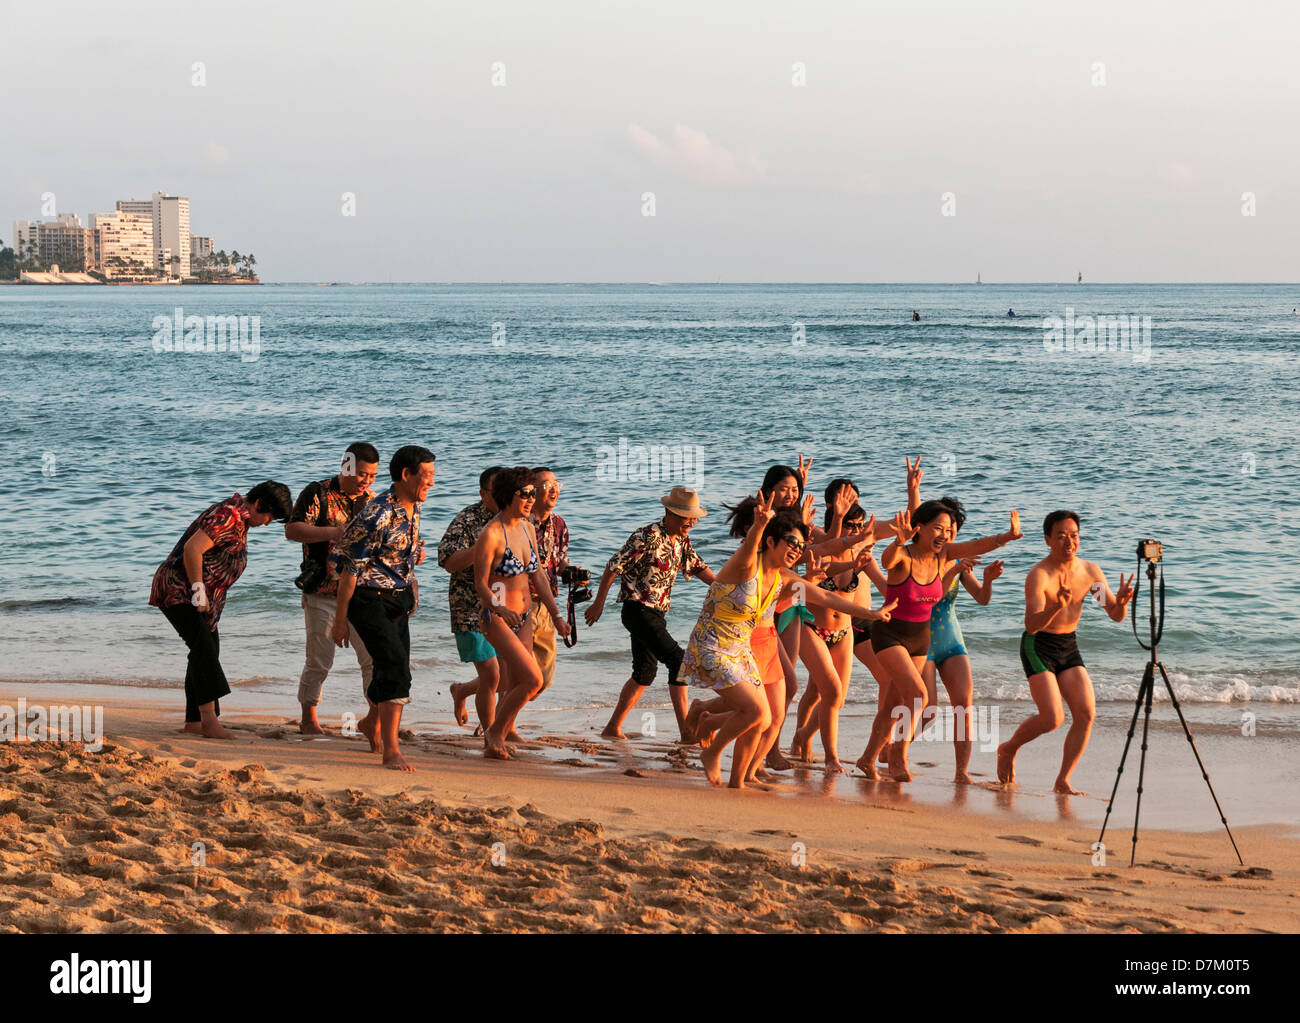 A group of Chinese tourists on Waikiki Beach making a happy video record of their trip to Hawaii. Stock Photo